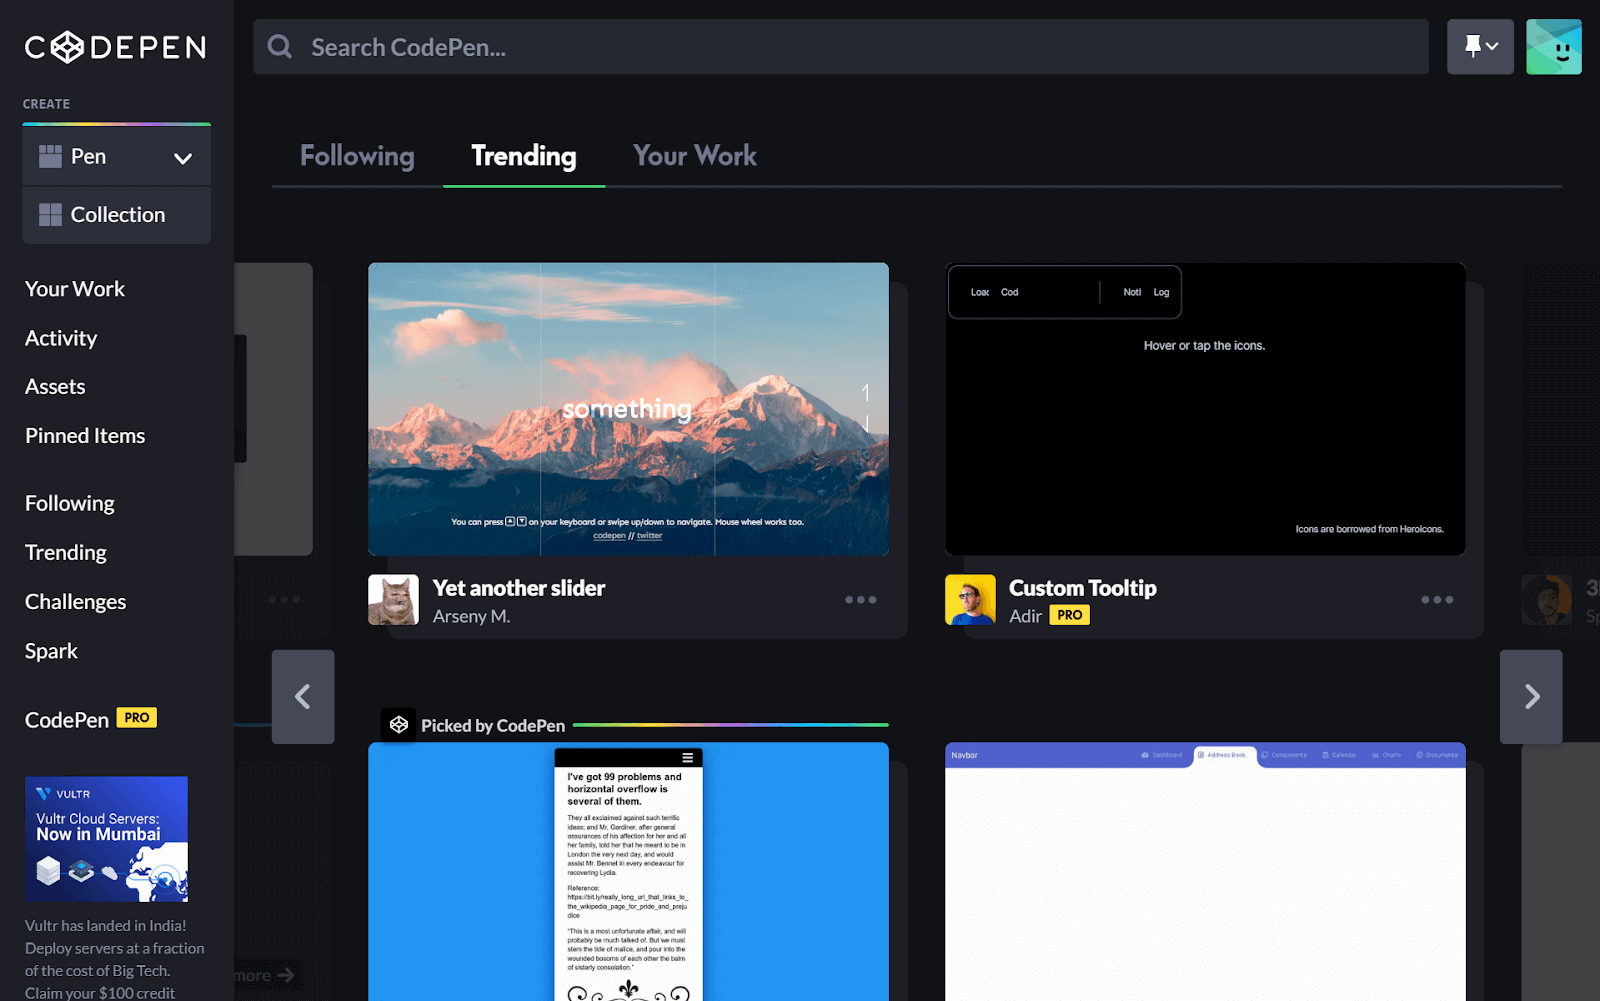 Codepen uses CSS Grid in the layout.